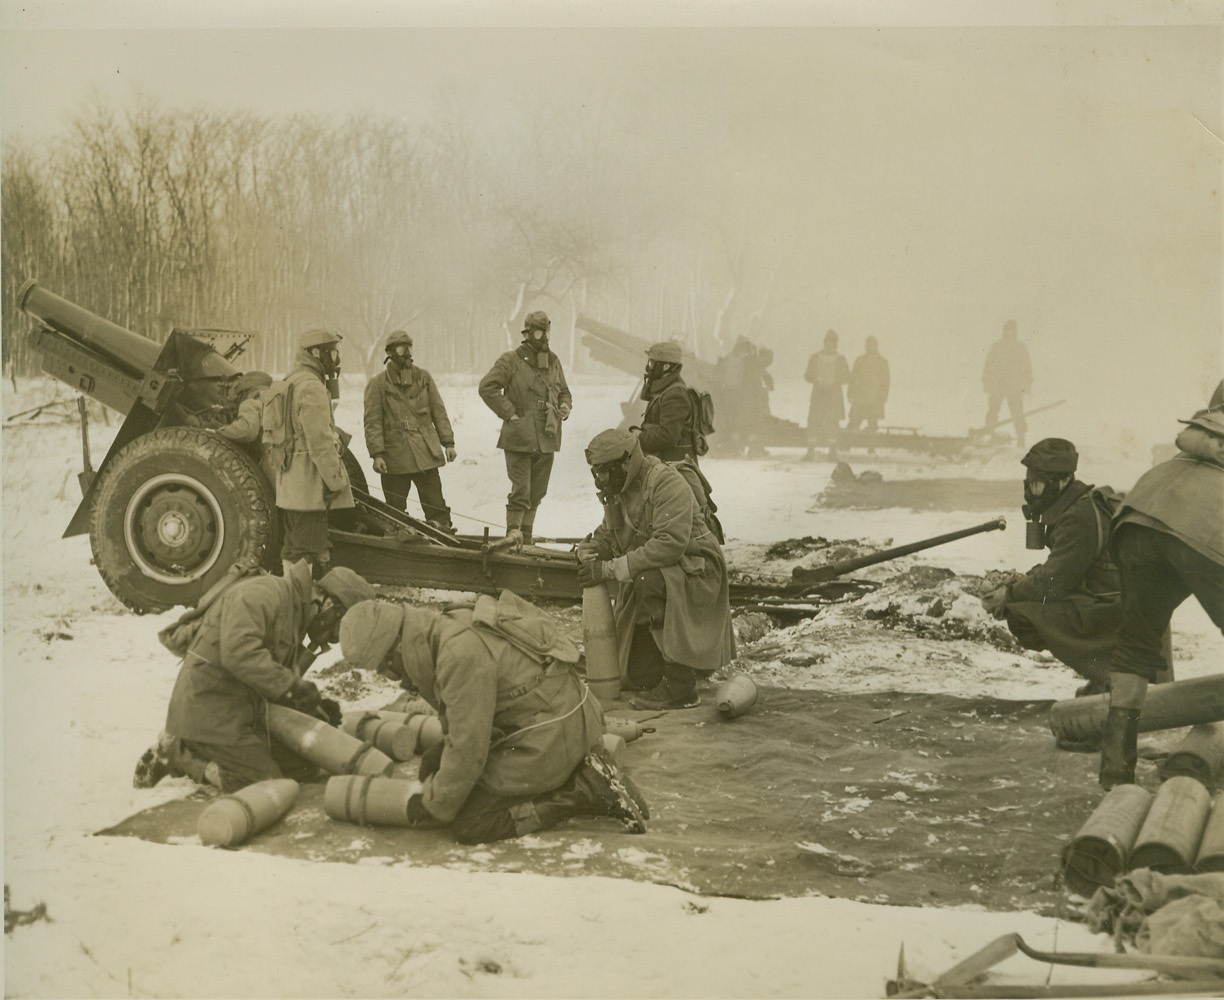 BATTERY UNDER GAS ATTACK AT FORT DIX, 1/28/41  FORT DIX, N.J. – A Battery of 155mm Howitzers of the 44th Division, under heavy gas attack from the “enemy” during maneuvers here, Jan. 28th, goes into action in a clearing in a snow-clad patch of woods. The Battery was attacked by gas by members of the 174th Infantry. Credit: OWI Radiophoto from ACME;